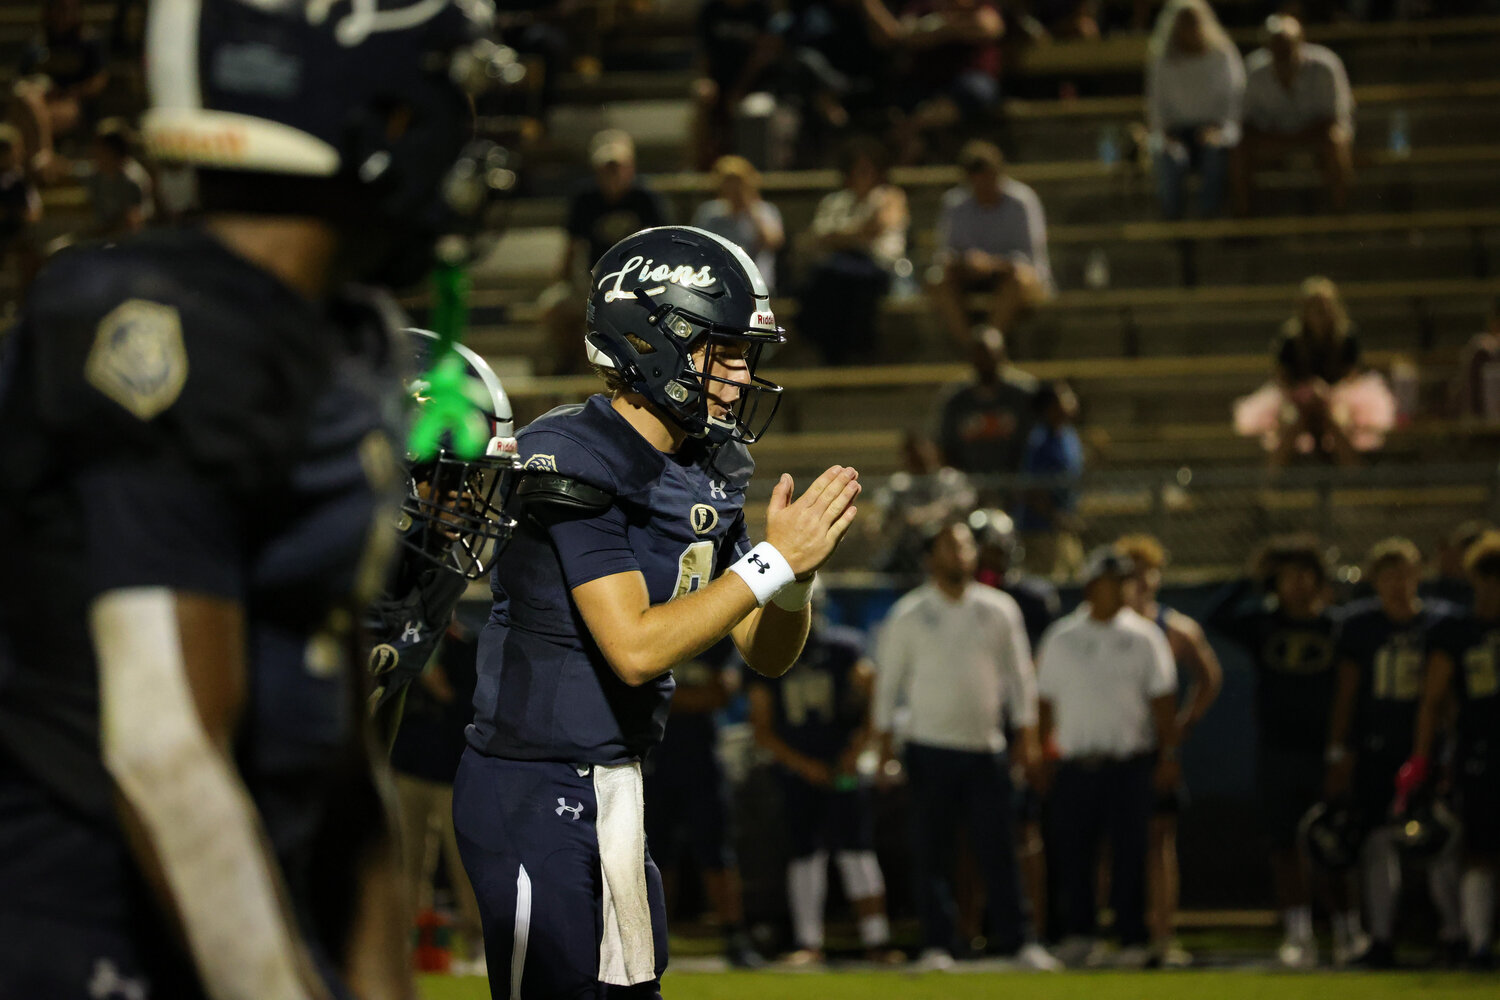 Foley quarterback Nelson Thompson clapping his hands to signal the center players to snap the ball Sep. 2 at the Ivan Jones Stadium in Foley.